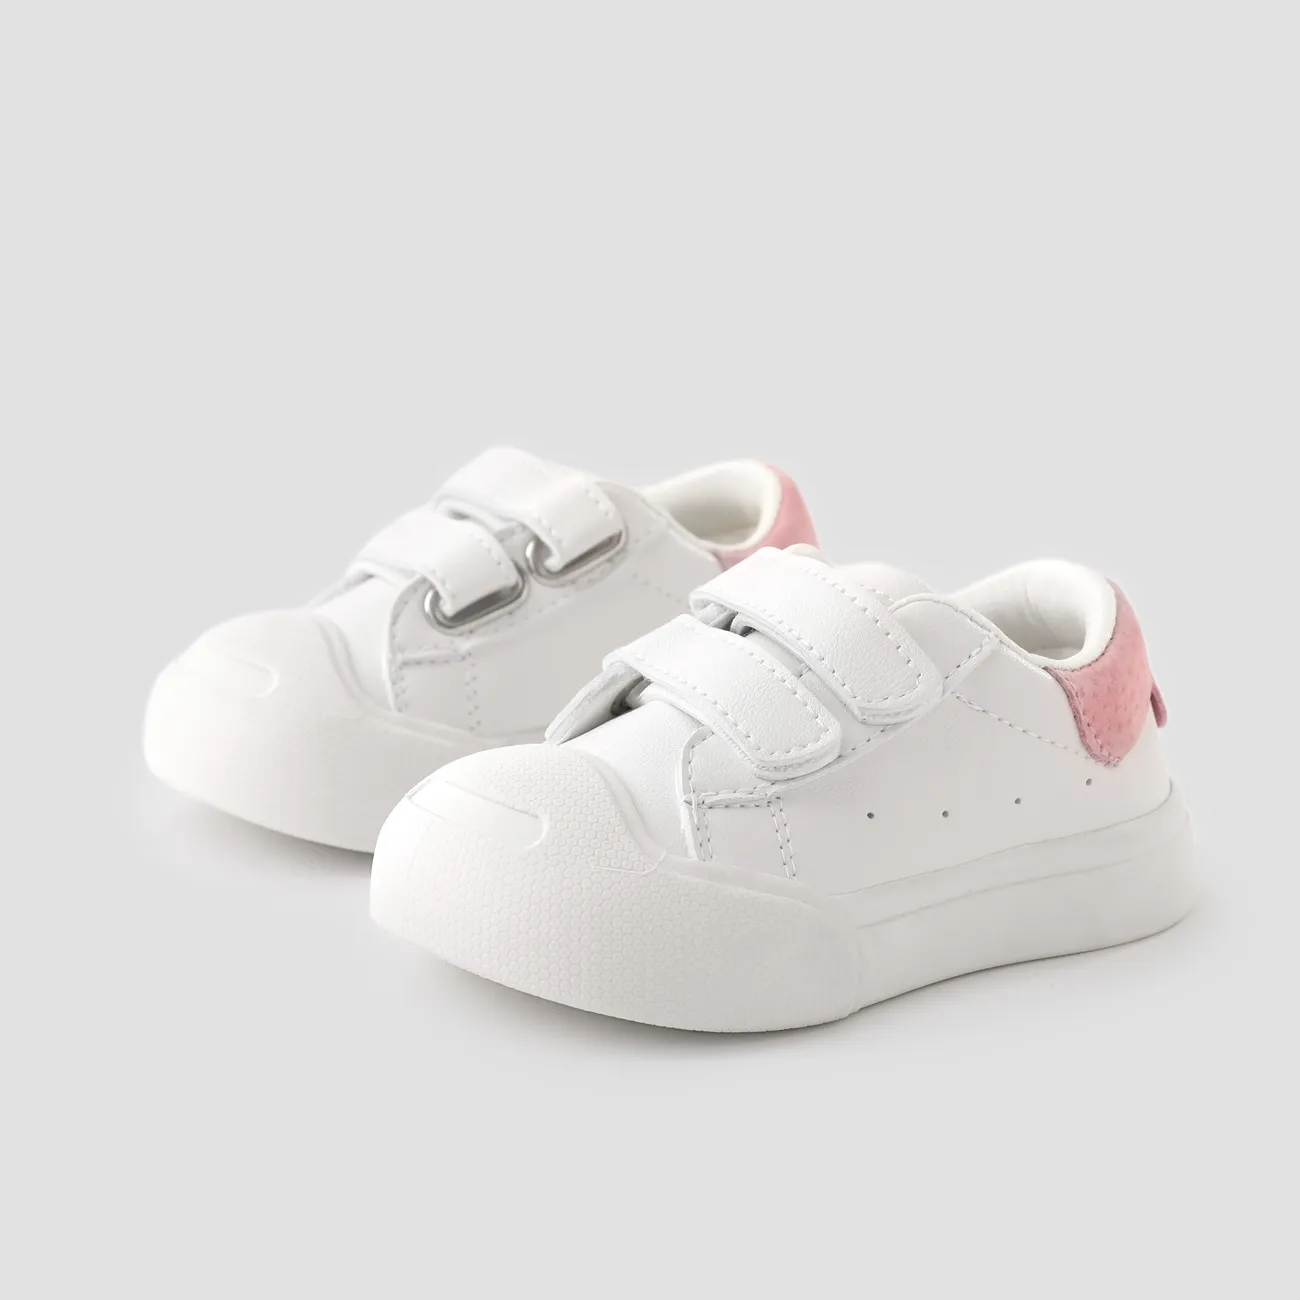 Toddler/Kids Girl Solid Velcro Leather Sports Shoes White big image 1